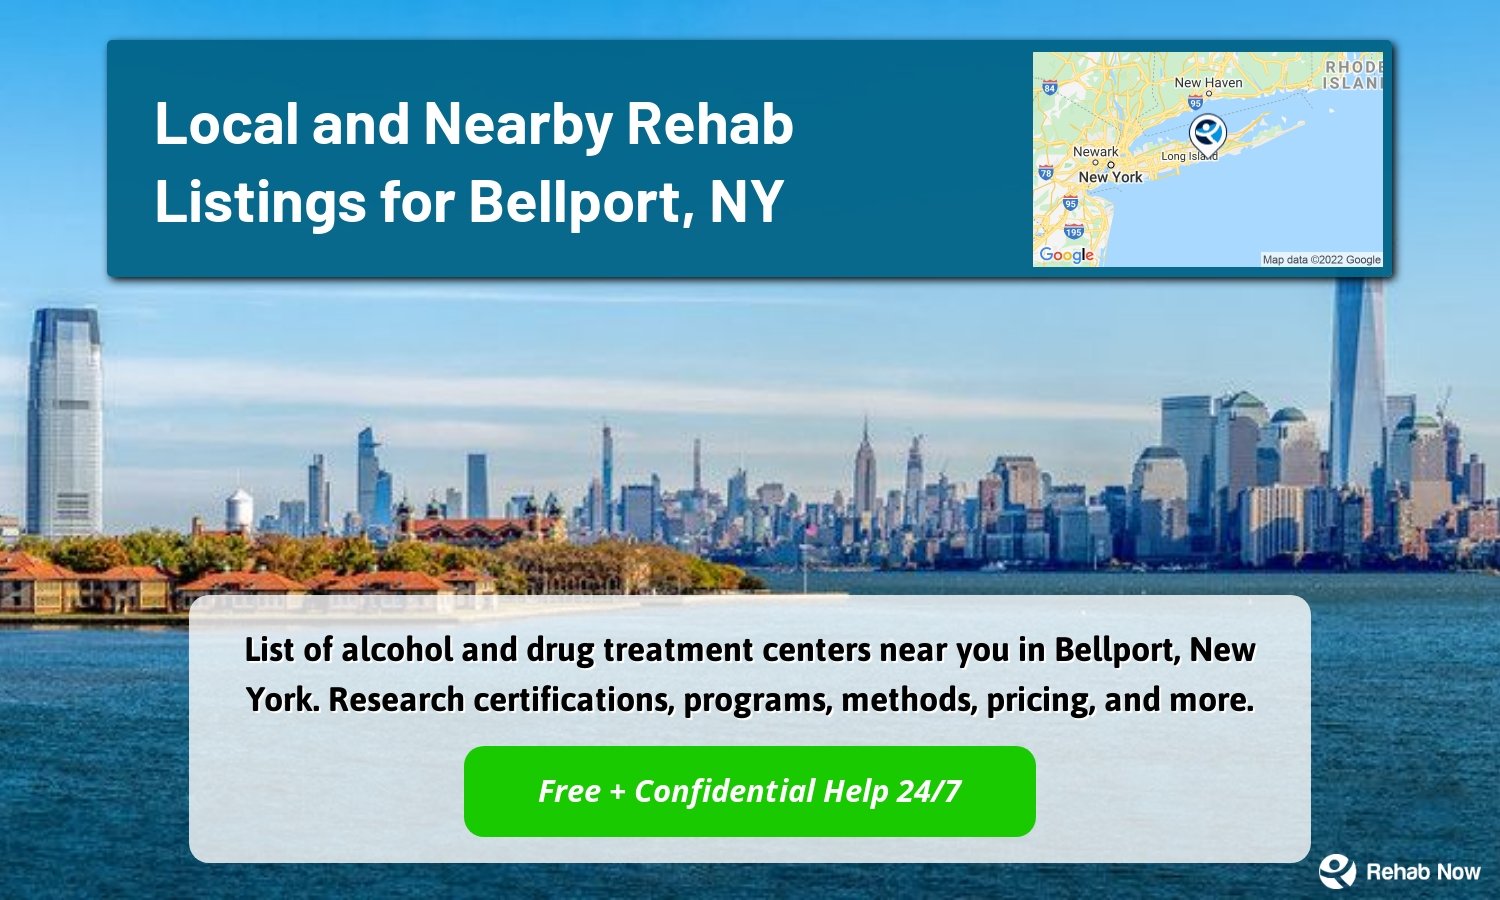 List of alcohol and drug treatment centers near you in Bellport, New York. Research certifications, programs, methods, pricing, and more.